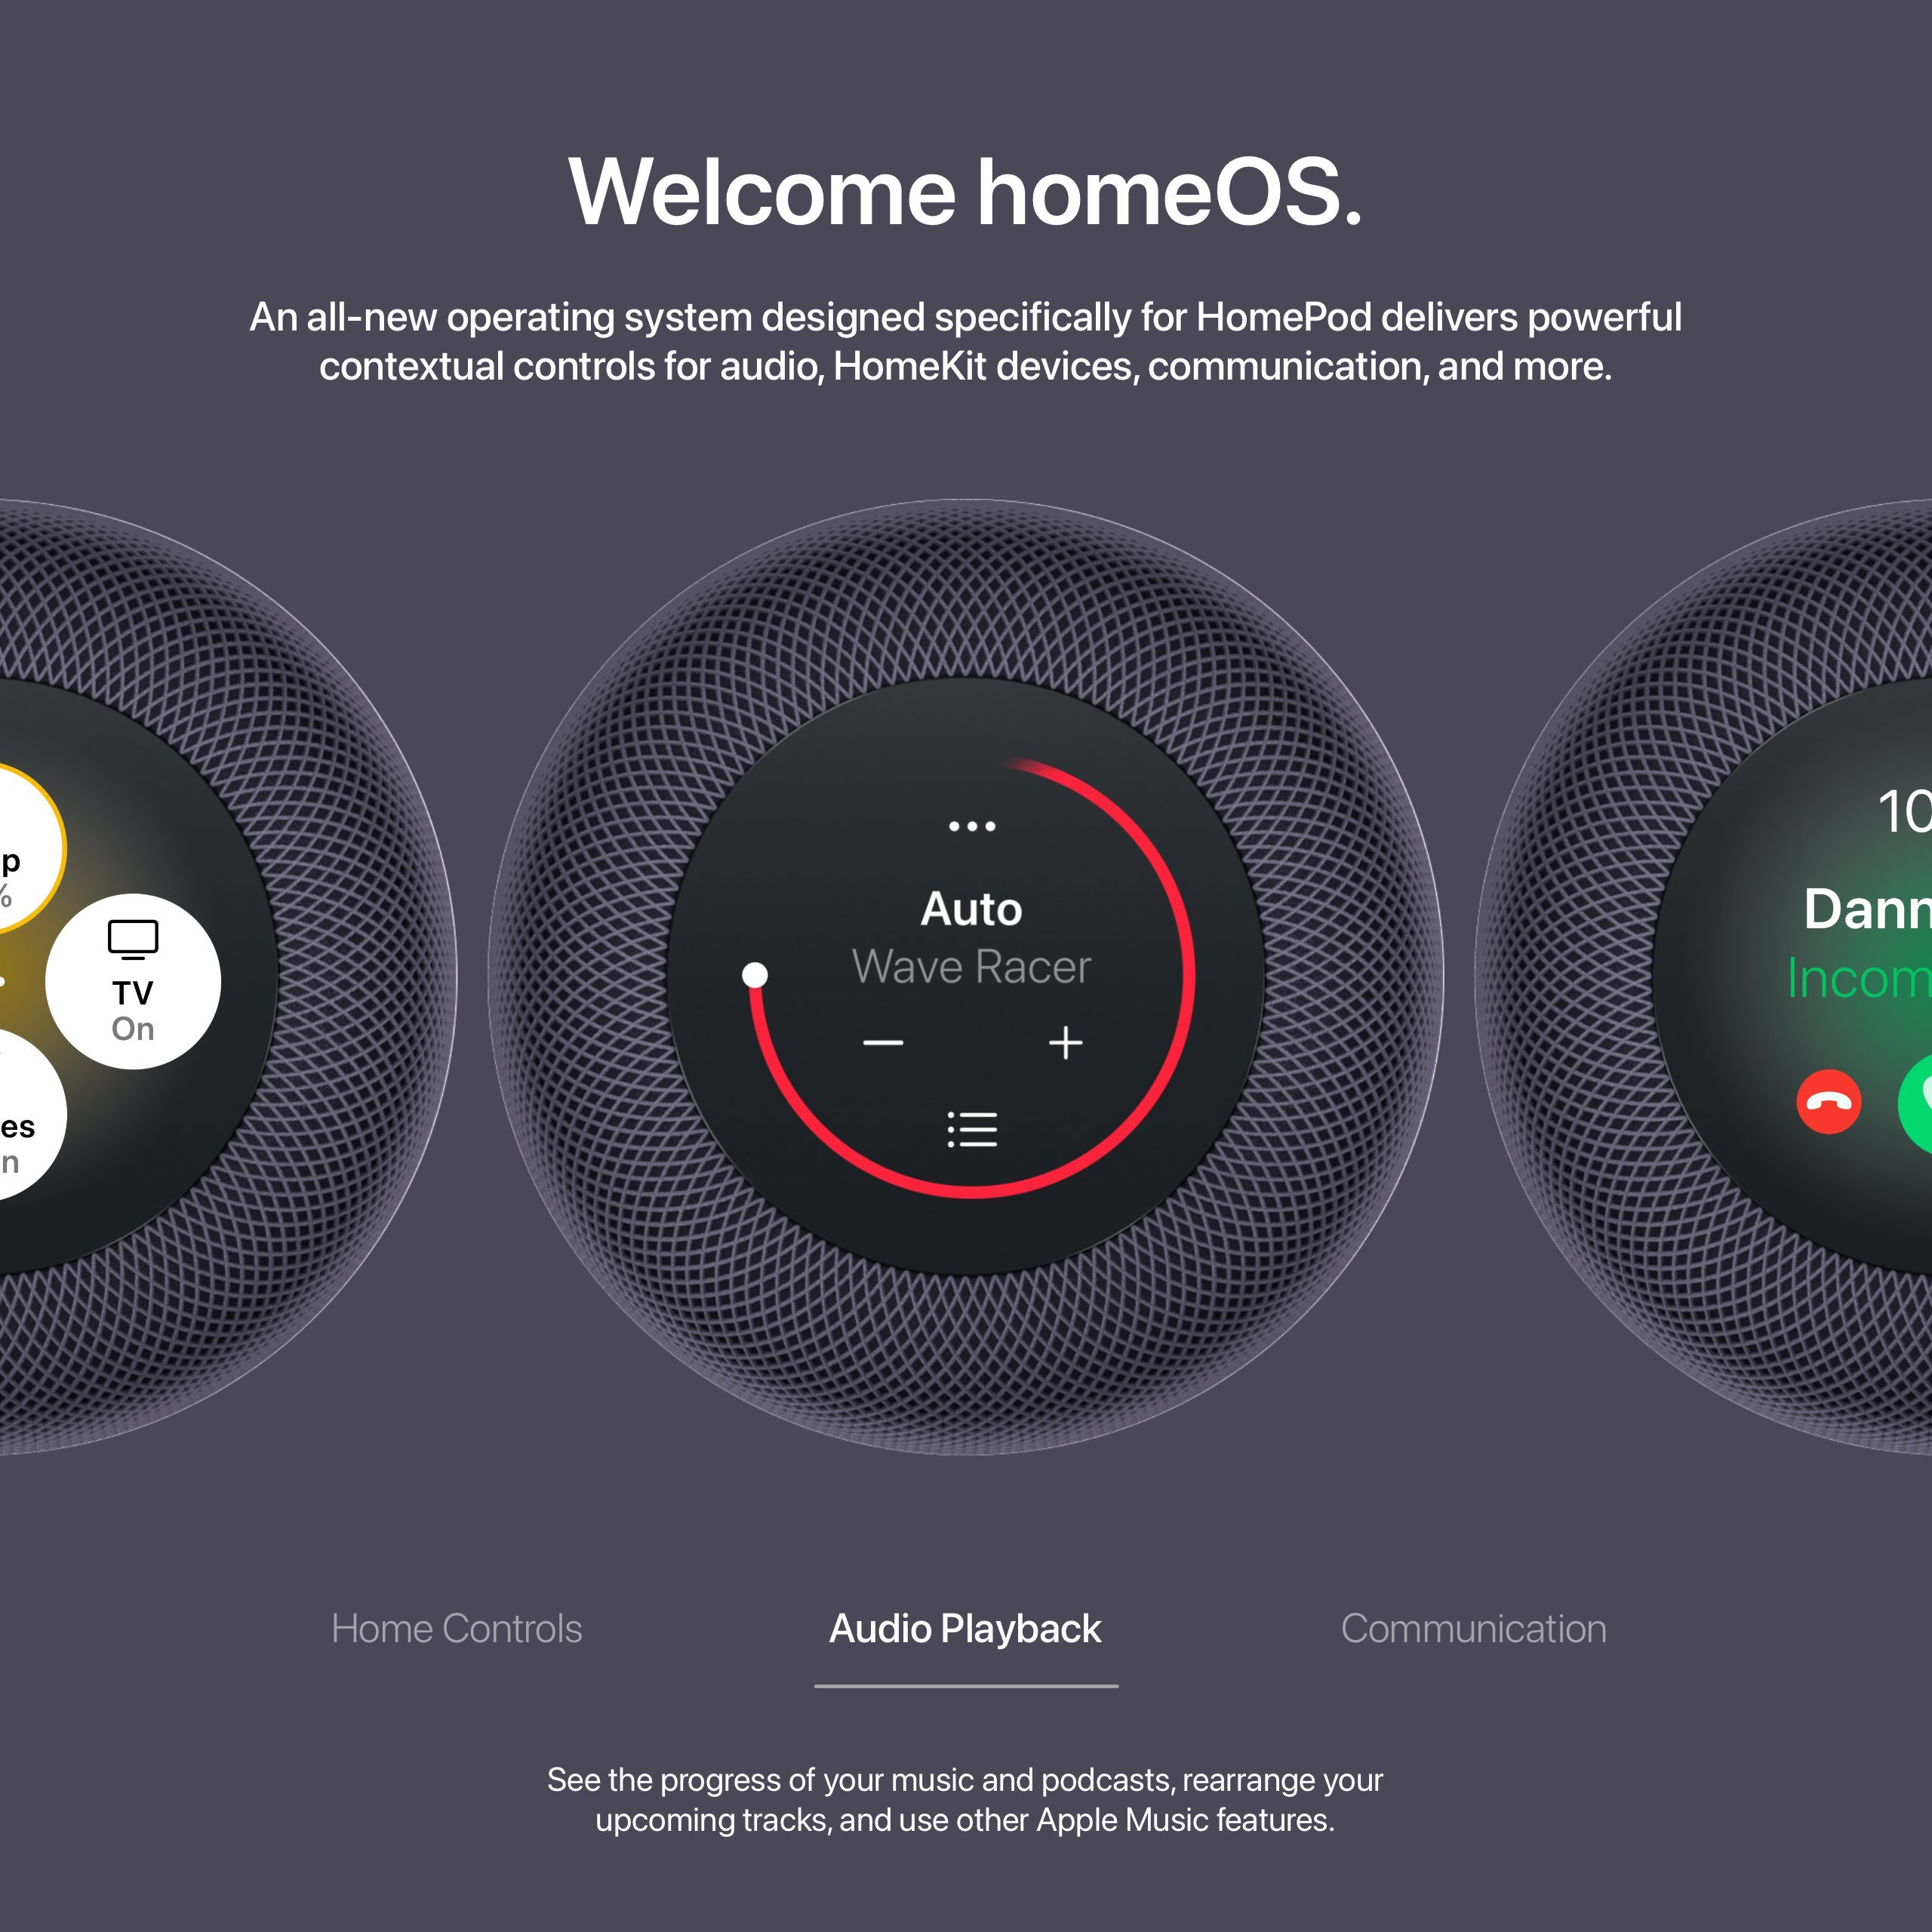 roundup: Here's everything Apple has been working on for its lineup of smart home products